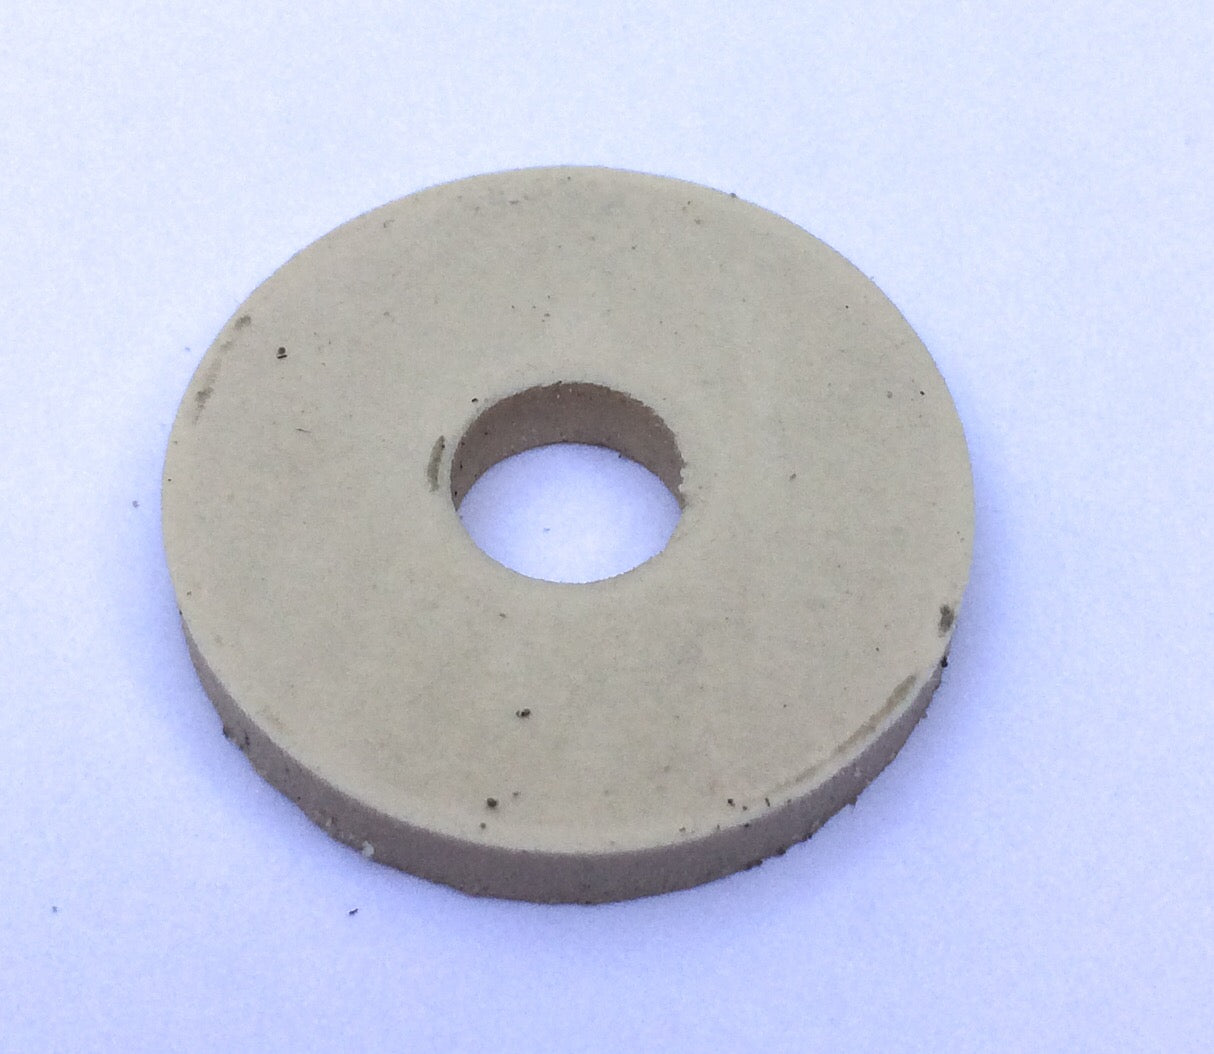 4 Rubber Chassis Mounting Washers for your Old Antique Wood Vintage Tube Radio Set of Four Gum Rubber Grommets